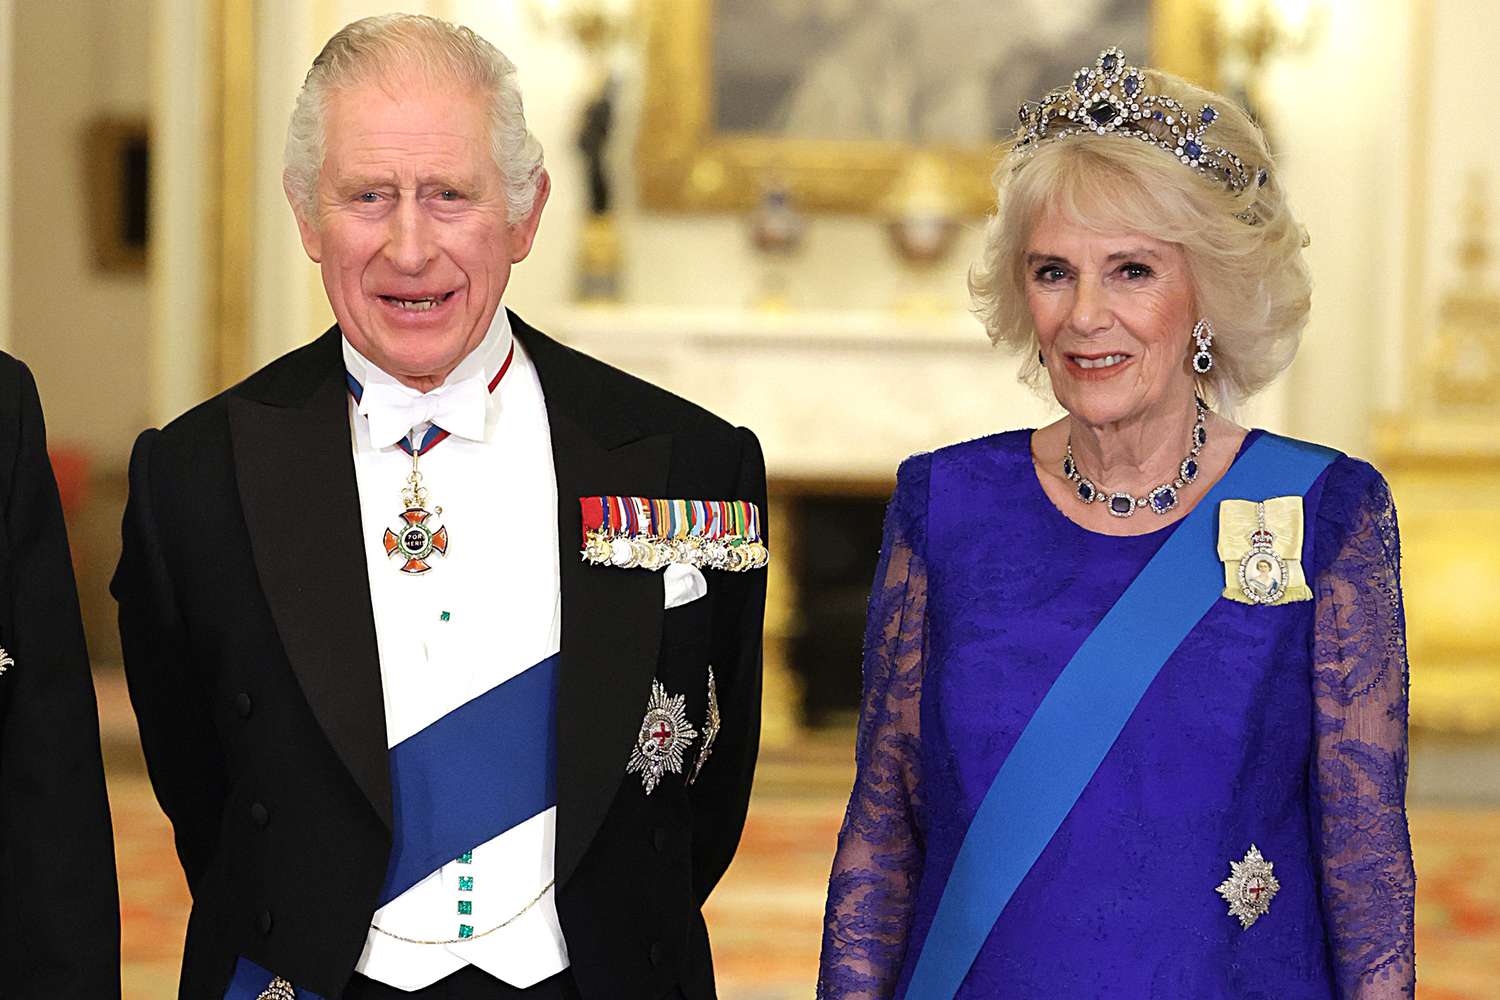 File image of King Charles III and Queen Camila.